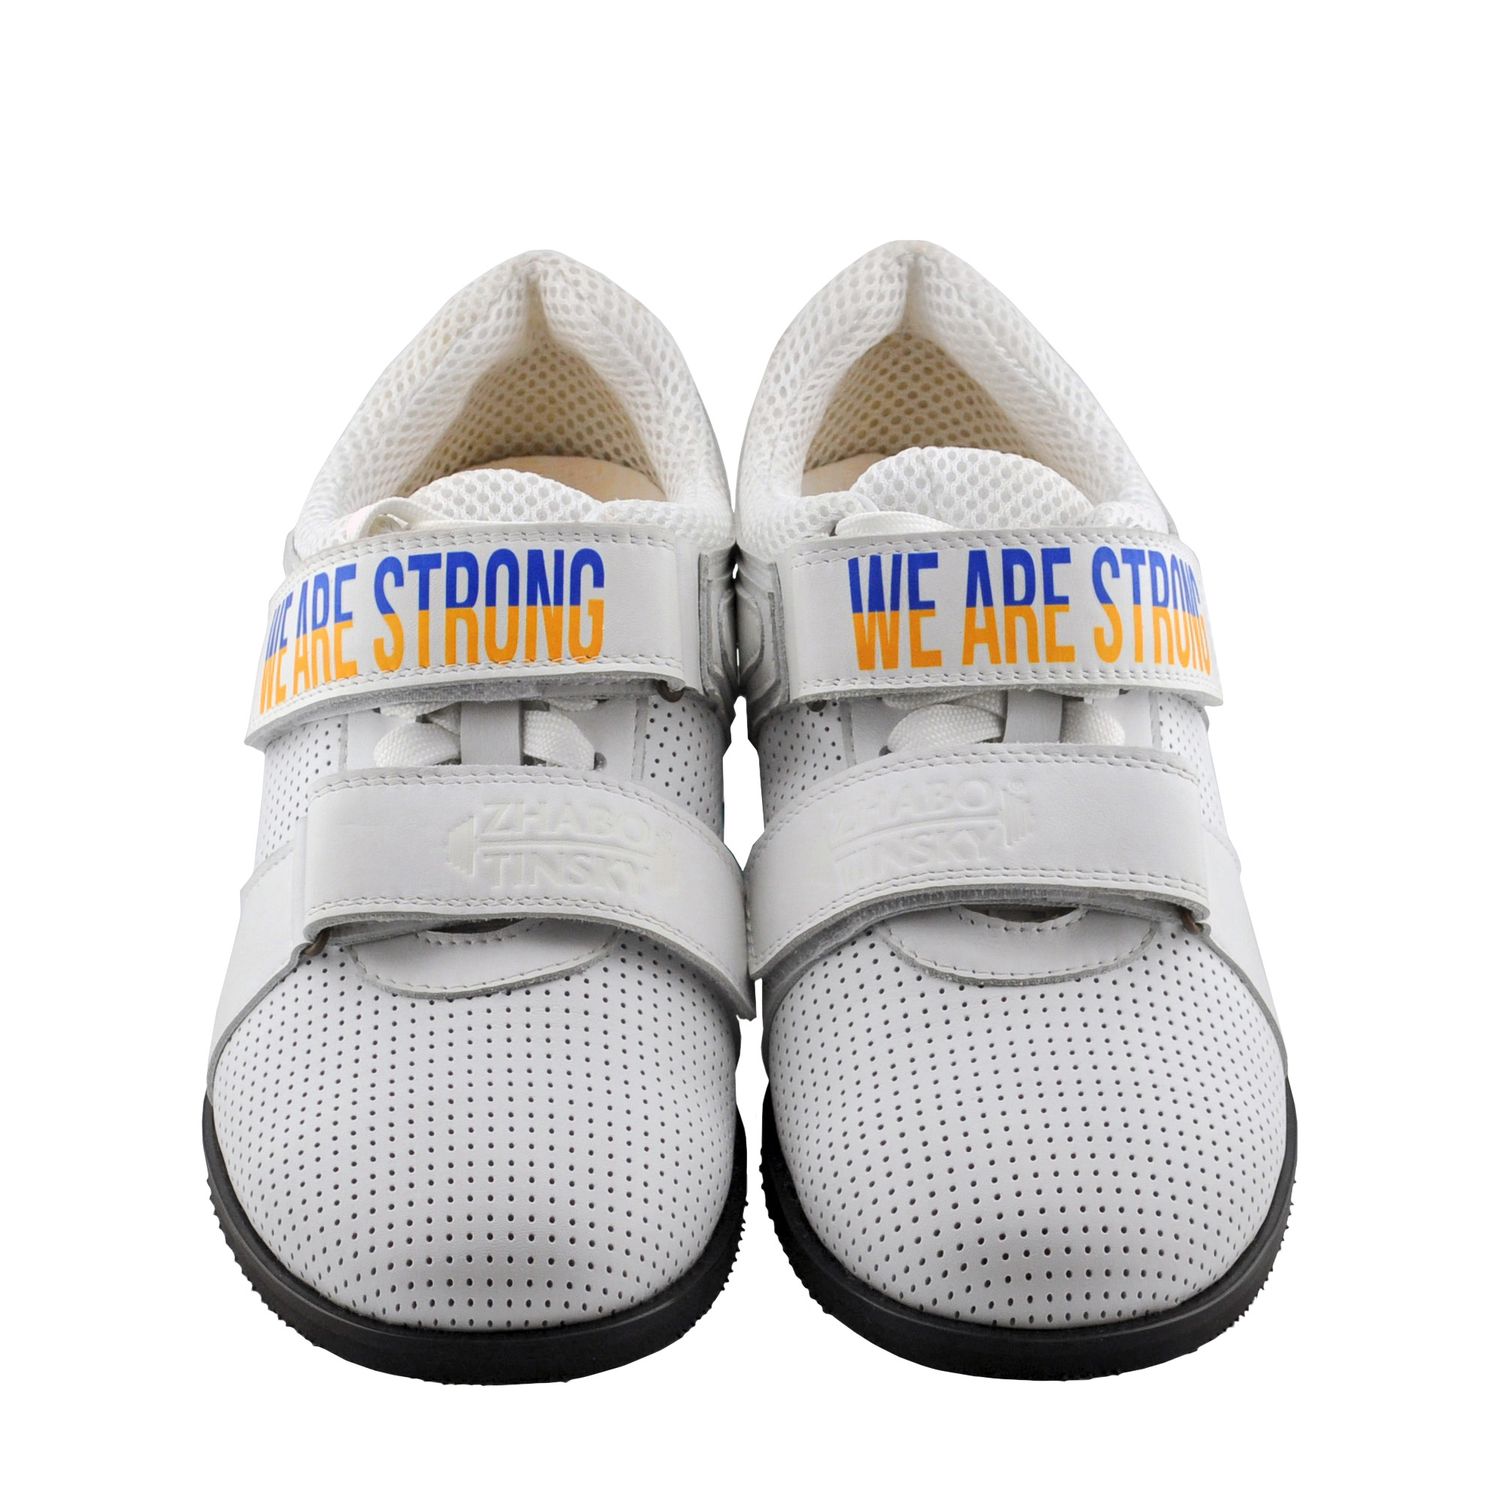 Weightlifting shoes Zhabotinsky We are strong, white, size 37 (UKR)